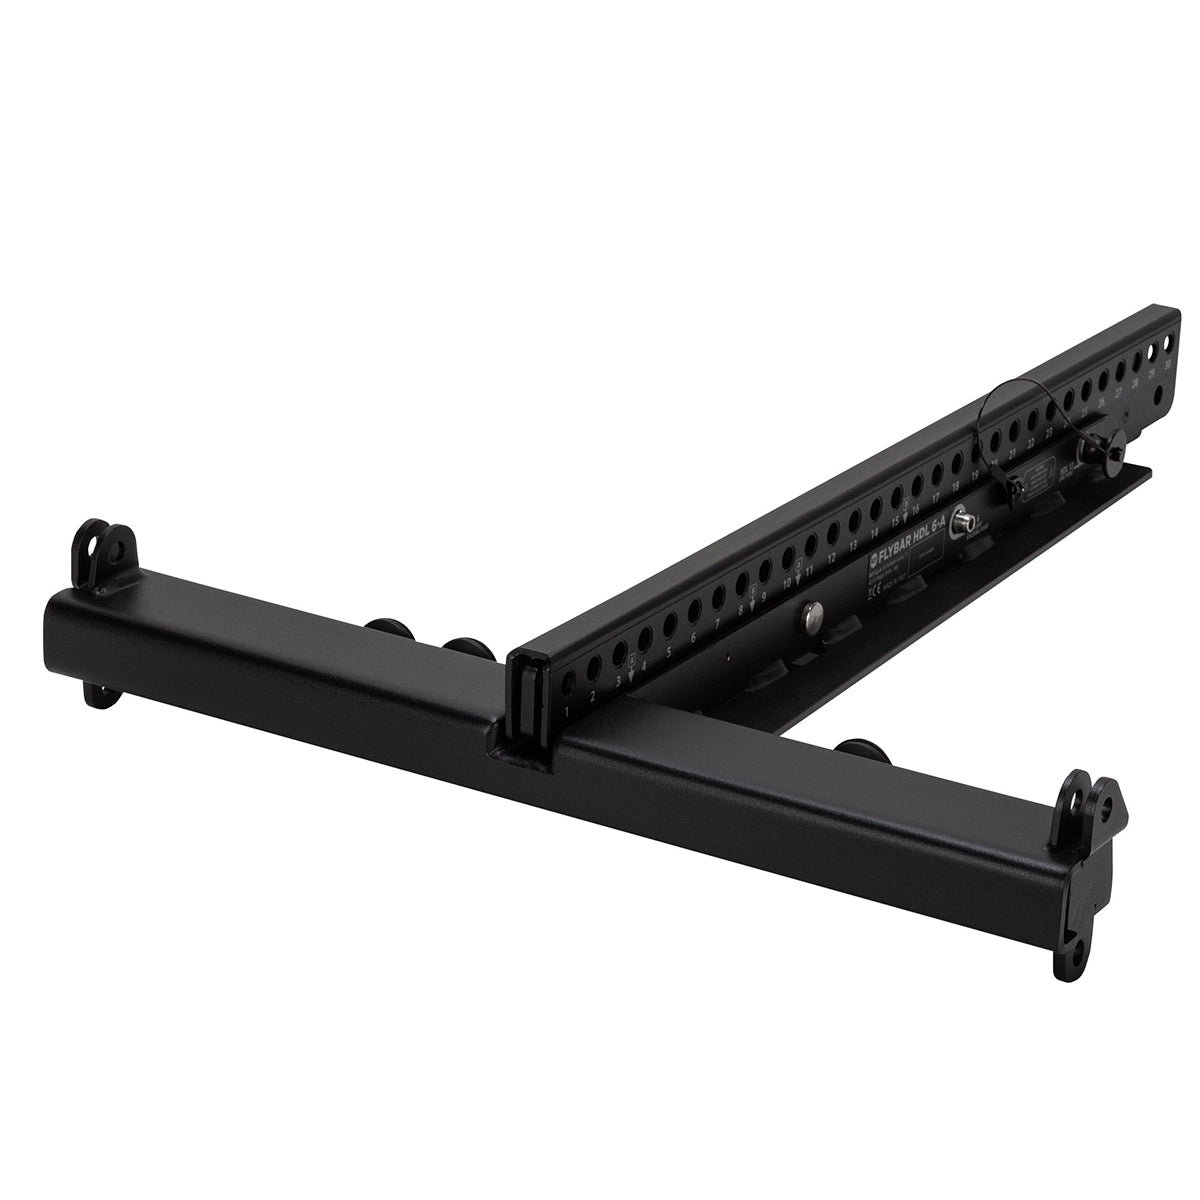 RCF FL-B HDL 6 Fly Bar with Pole Mount